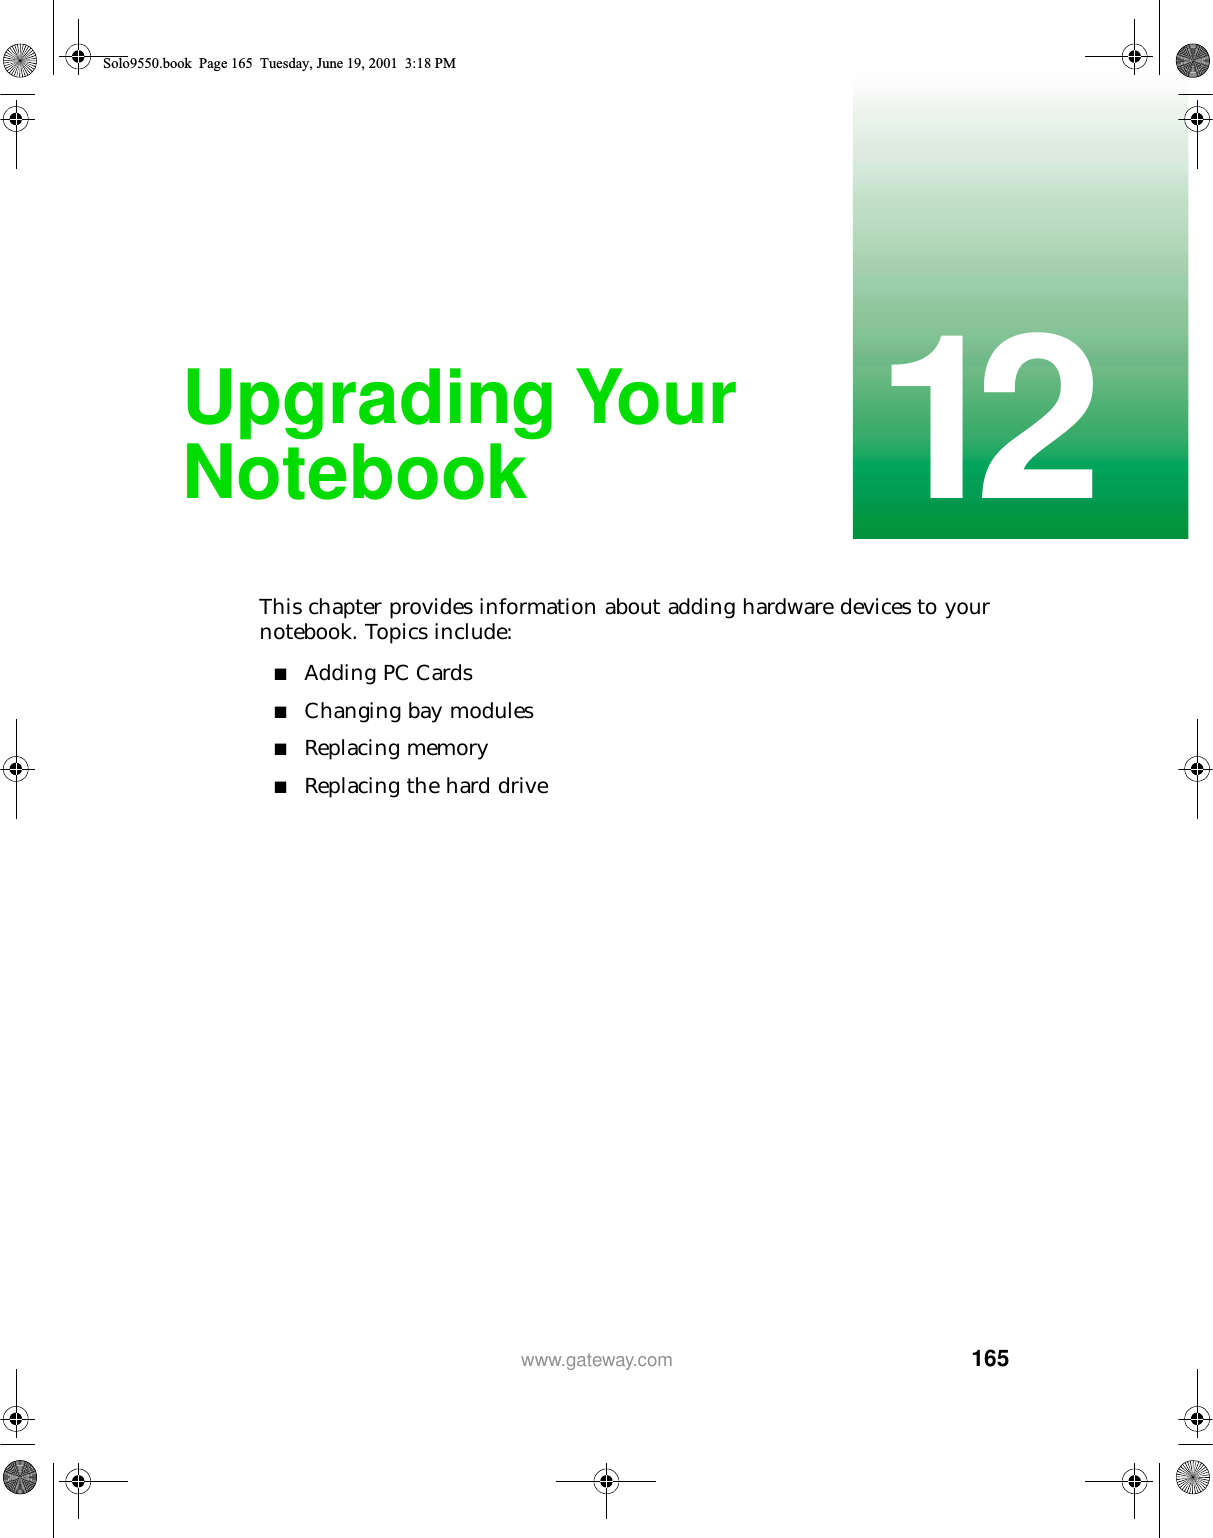 16512www.gateway.comUpgrading Your NotebookThis chapter provides information about adding hardware devices to your notebook. Topics include:■Adding PC Cards■Changing bay modules■Replacing memory■Replacing the hard driveSolo9550.book Page 165 Tuesday, June 19, 2001 3:18 PM